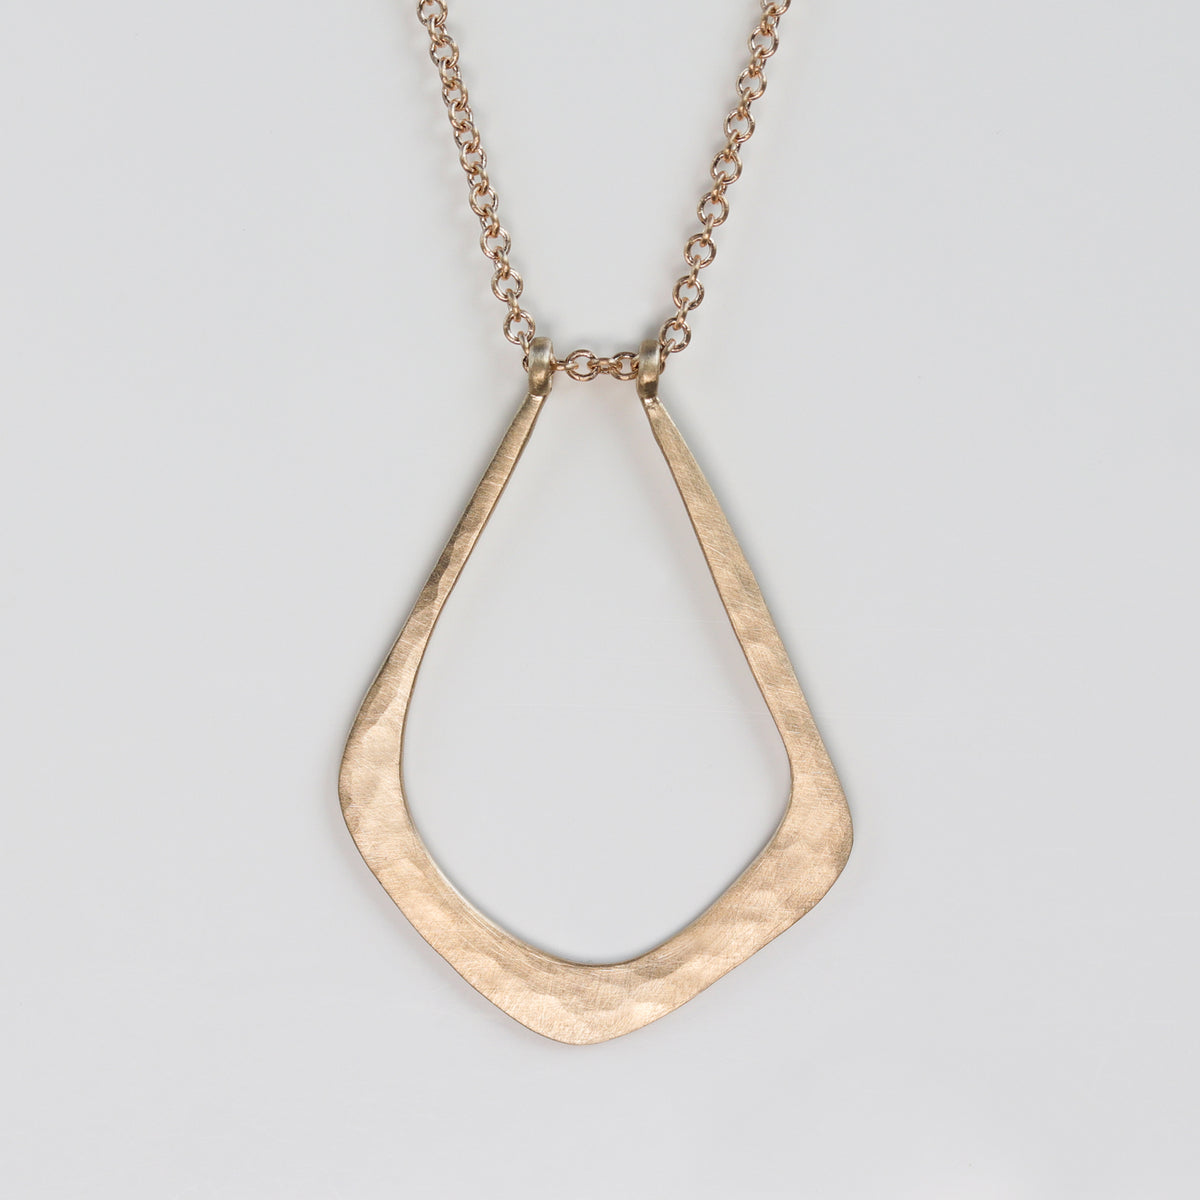 Sterling Silver Ring Holder Necklace By Potiega | notonthehighstreet.com